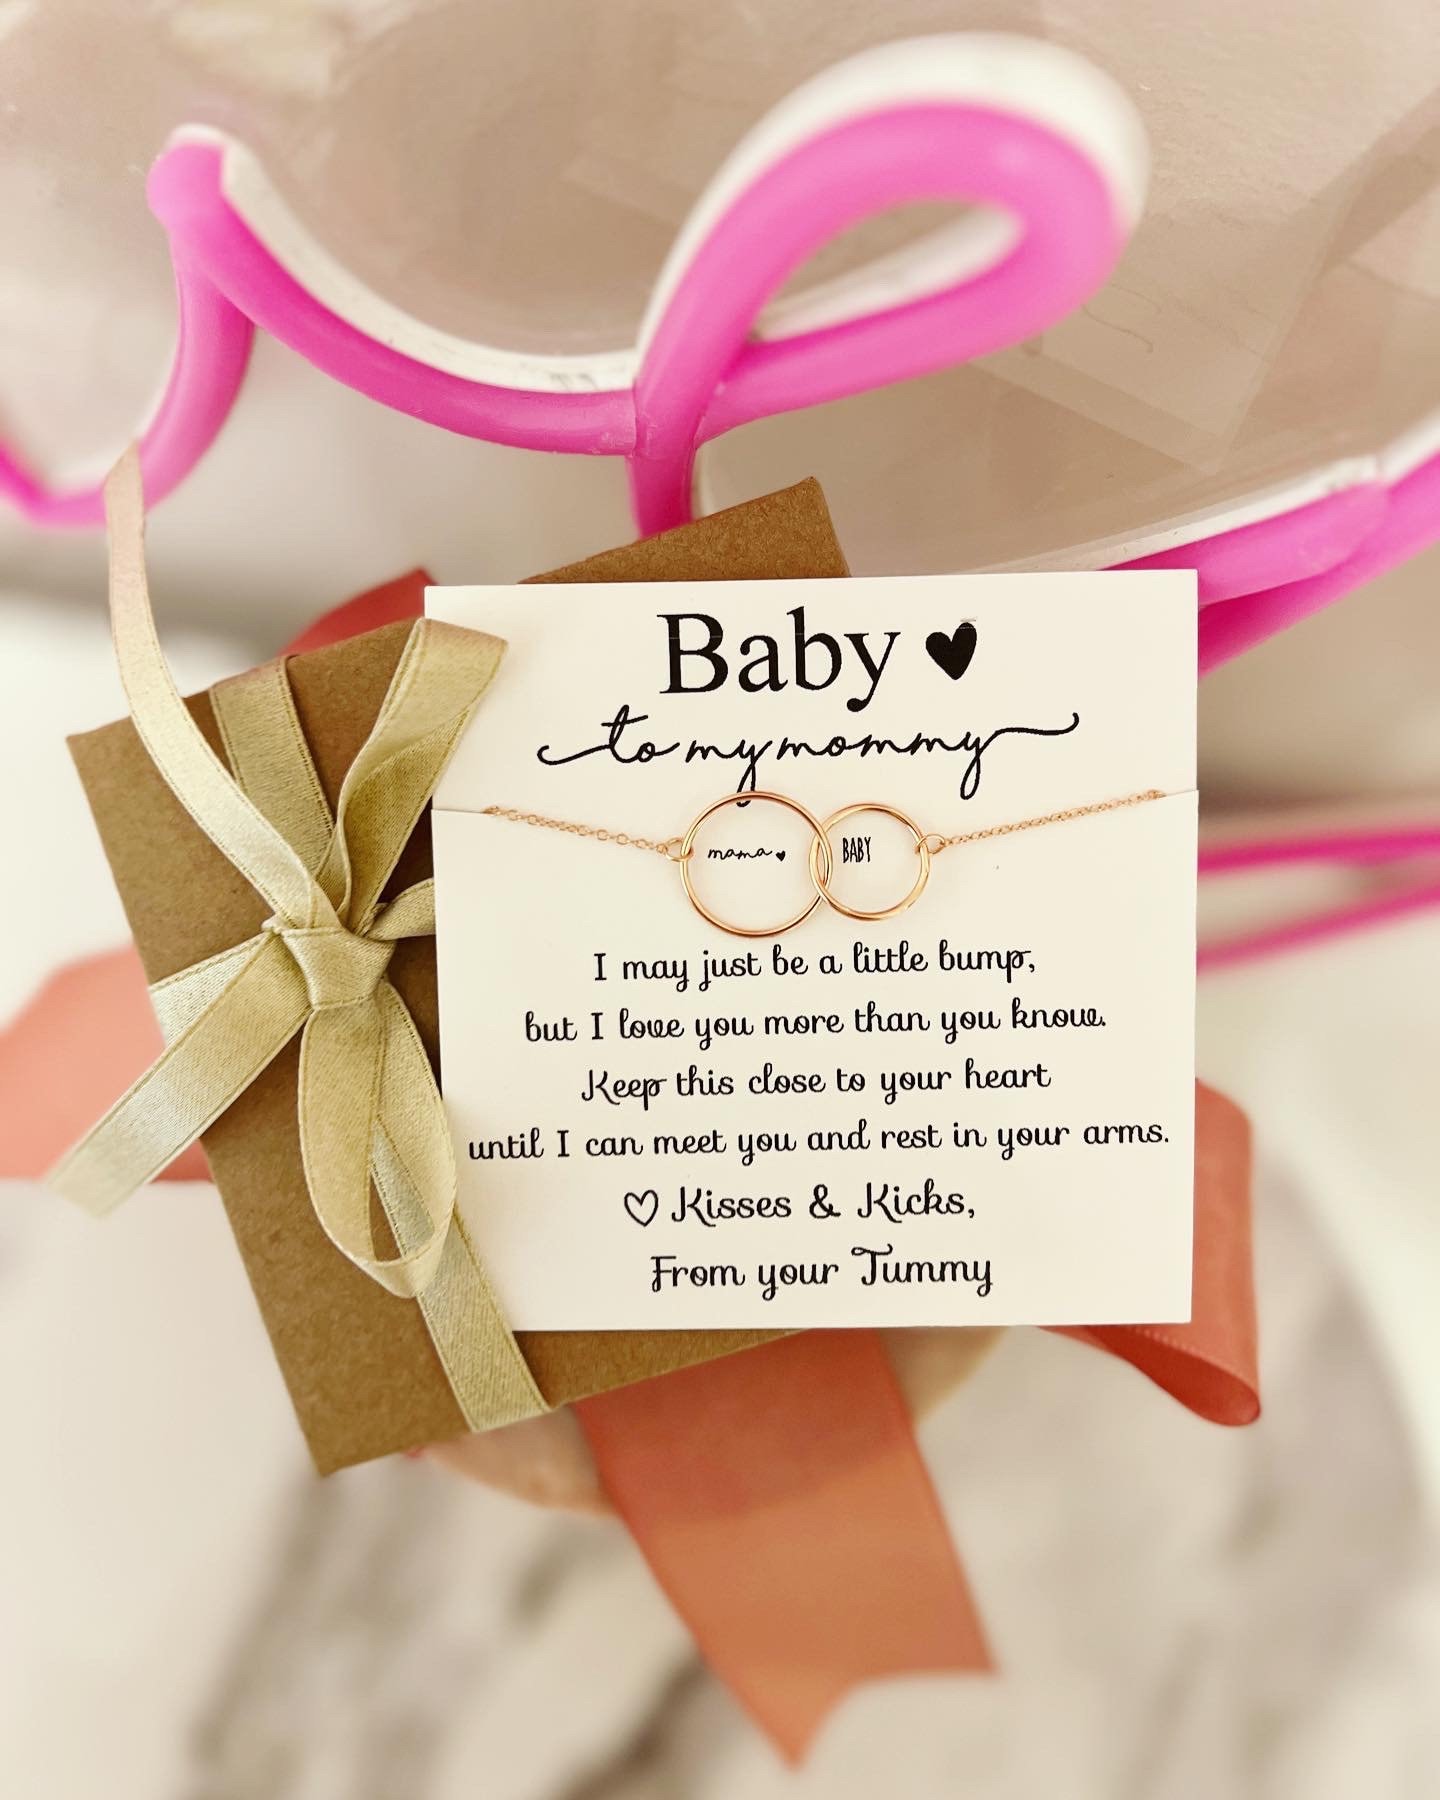 Baby Products Online - Maternity gifts for moms for the first time,  announcement of pregnancy, gifts for new mom for women, gift idea for mom  for the first time, mom, gifts for